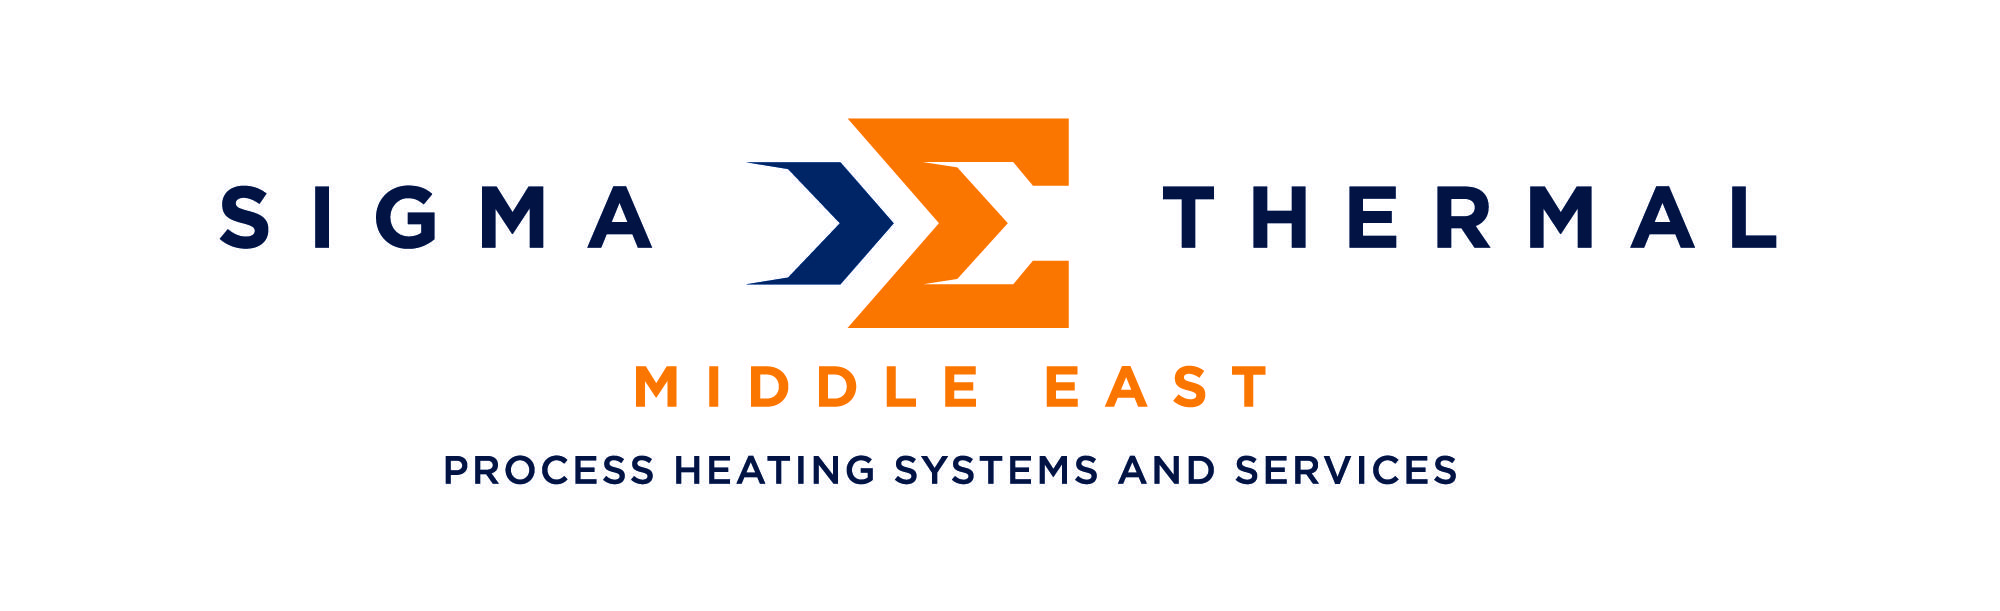 Thermal Logo - Flaretec Merges with Sigma Thermal, Inc. to Expand Middle East ...